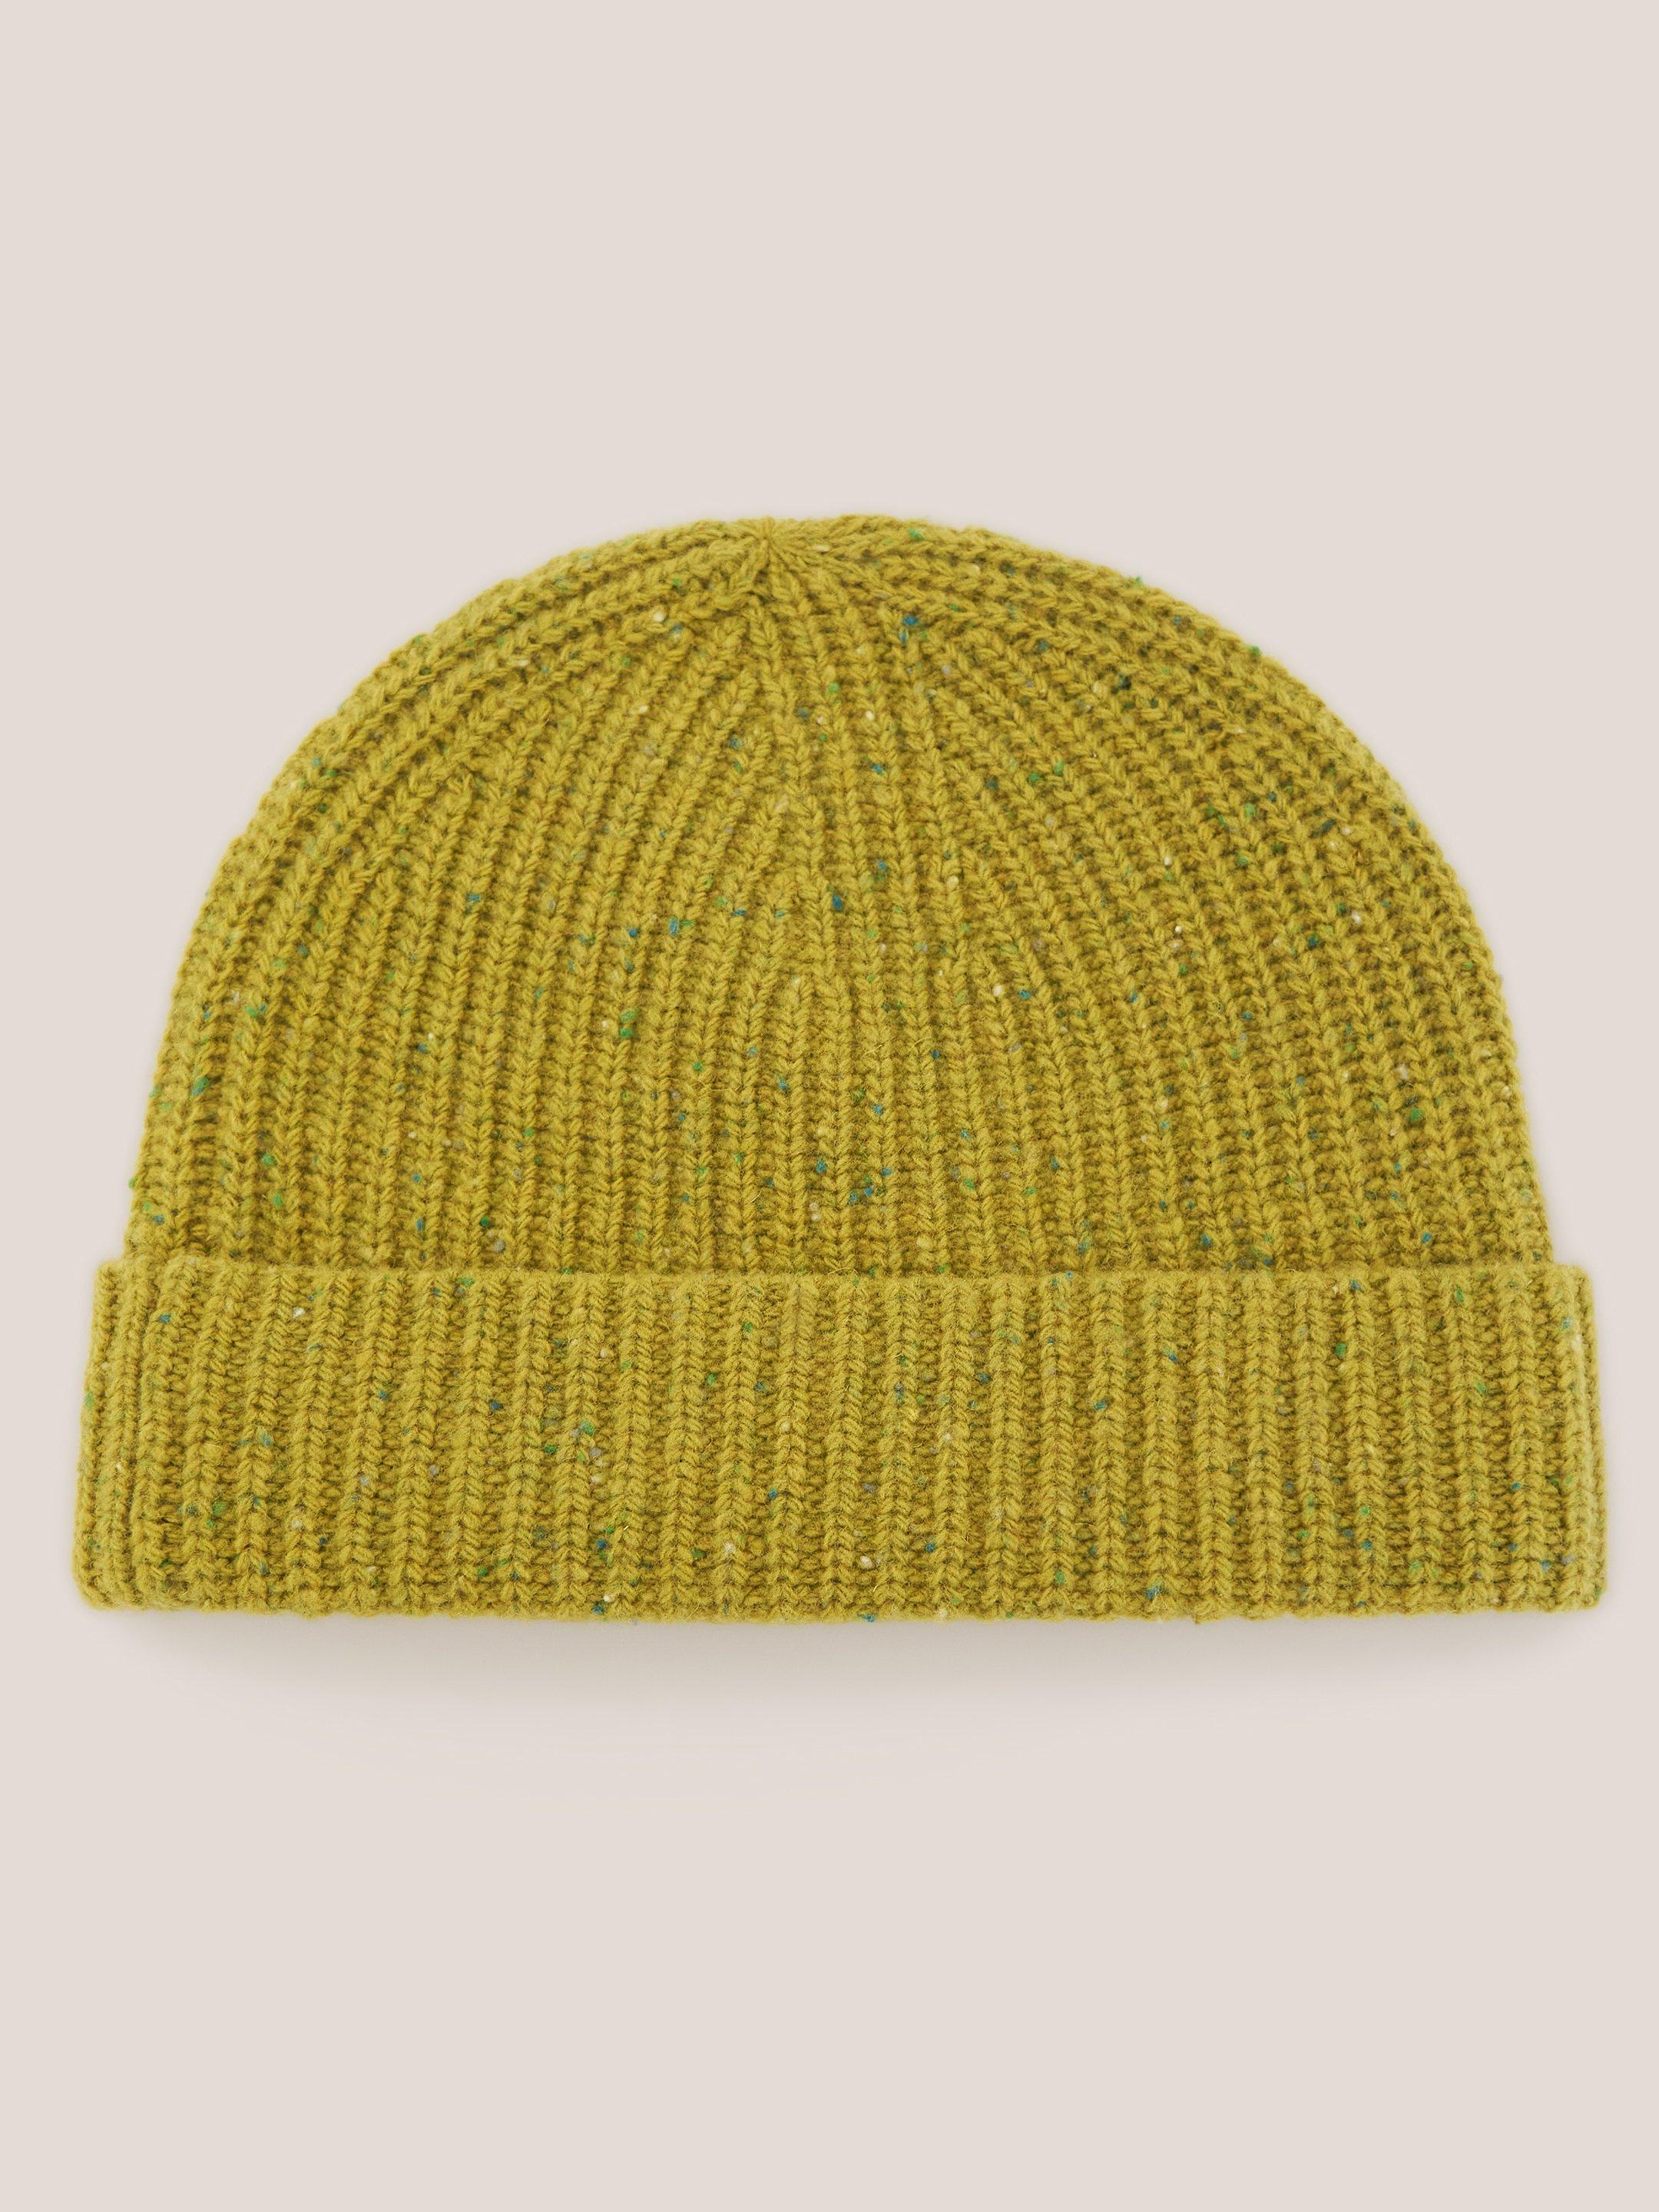 Wool Ribbed Beanie in MID CHART - FLAT BACK